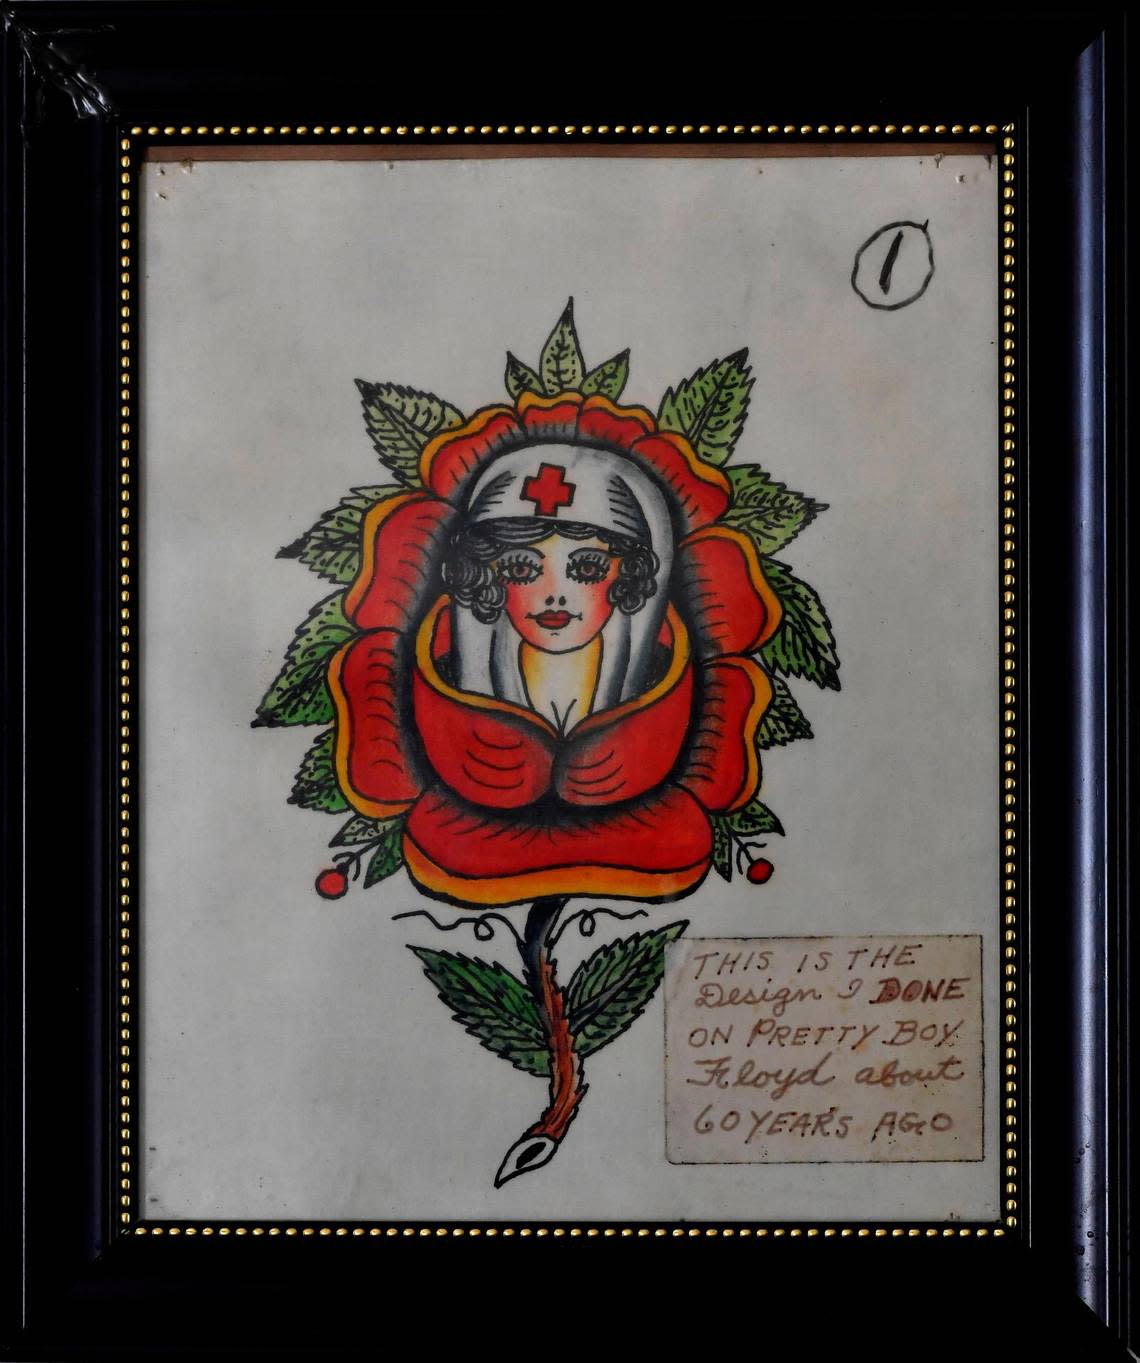 Included in the collection of the Bert Grimm Tattoo Museum is a design Bert Grimm claimed to have tattooed on gangster Pretty Boy Floyd. 